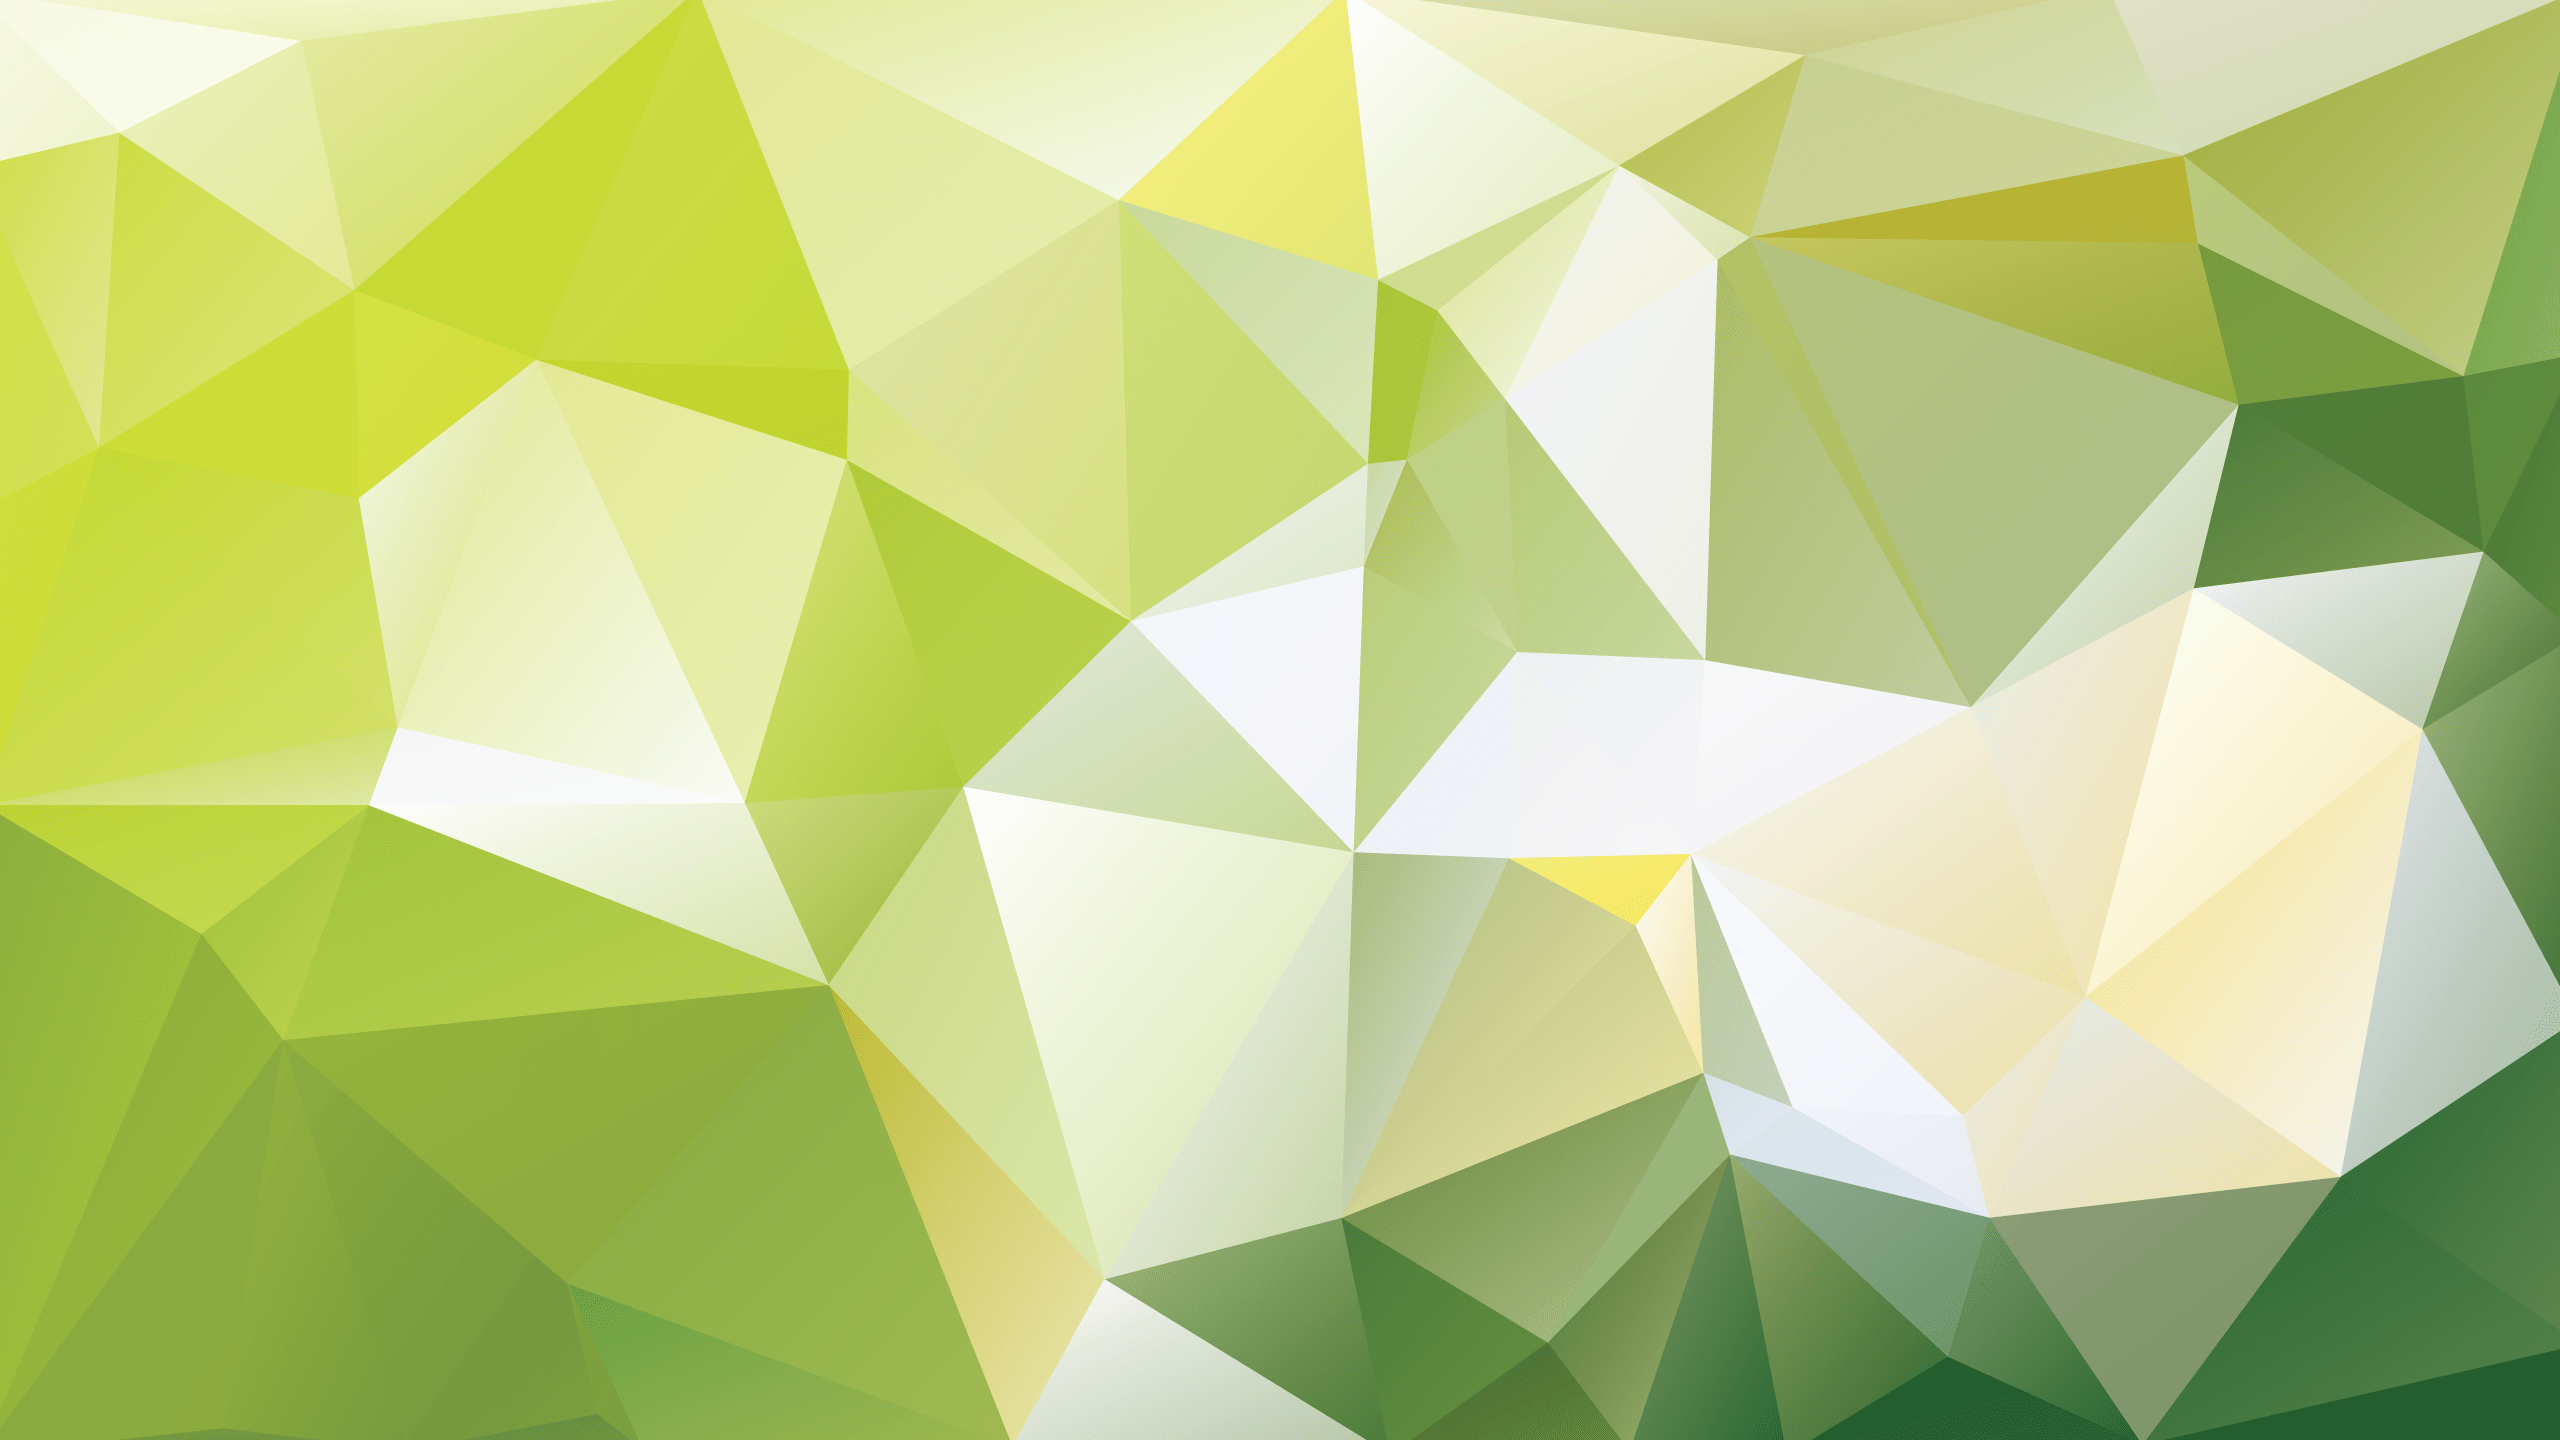 Green with Yellow Triangle Logo - Wallpaper : illustration, symmetry, green, yellow, triangle, pattern ...